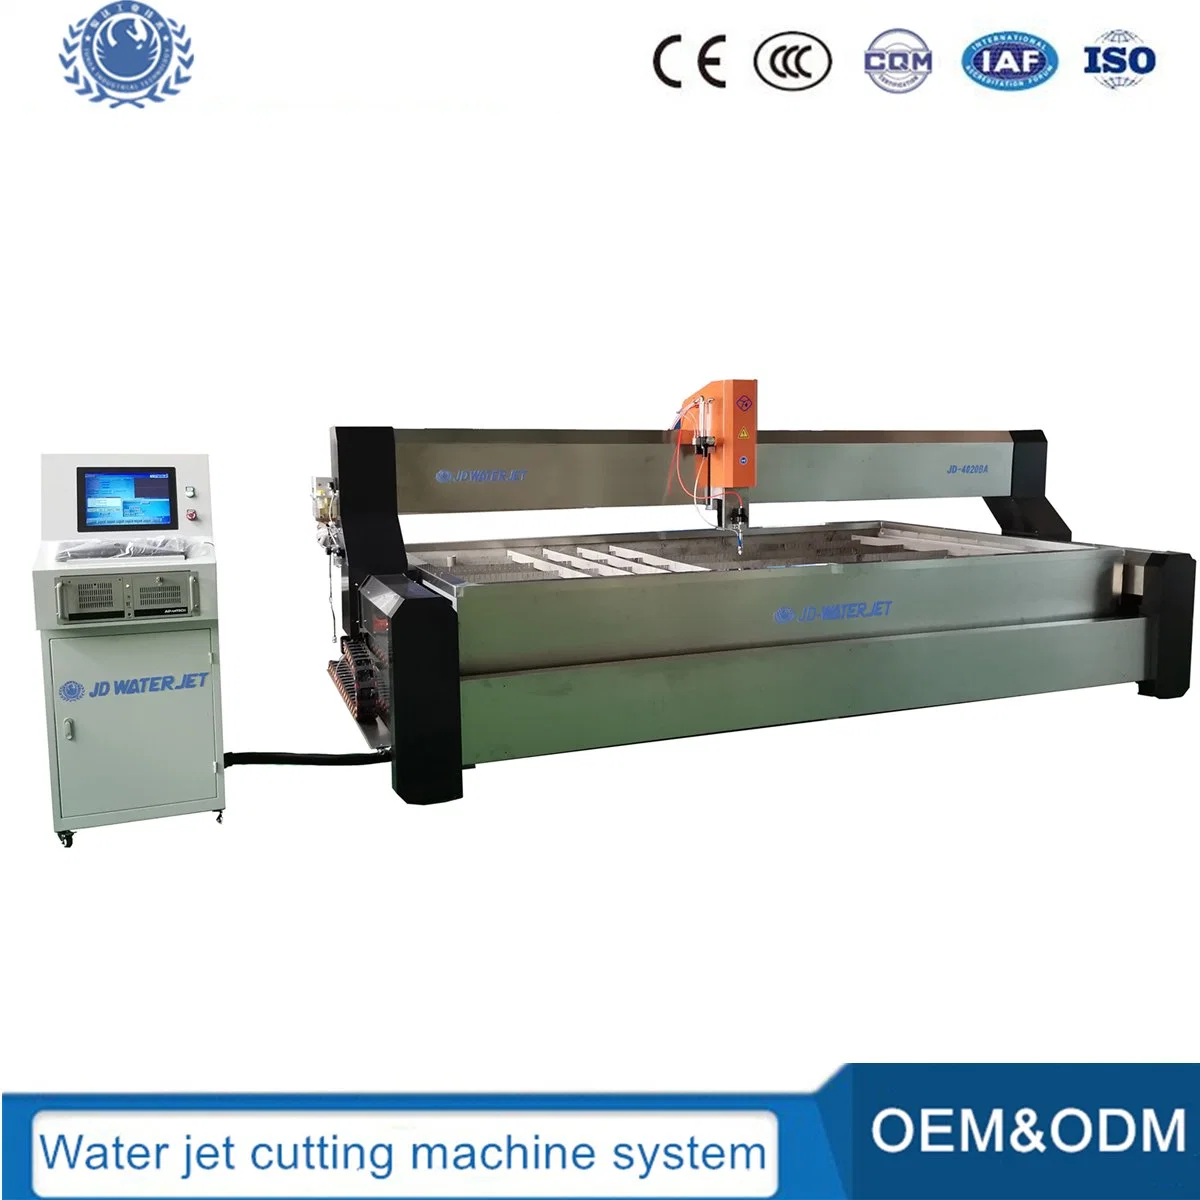 5 Axis CNC Waterjet Stone Cutting and Milling Machine Glass Metal Engraving Ceramic Wood Drilling Router Counter Top Tile Cutter Machine